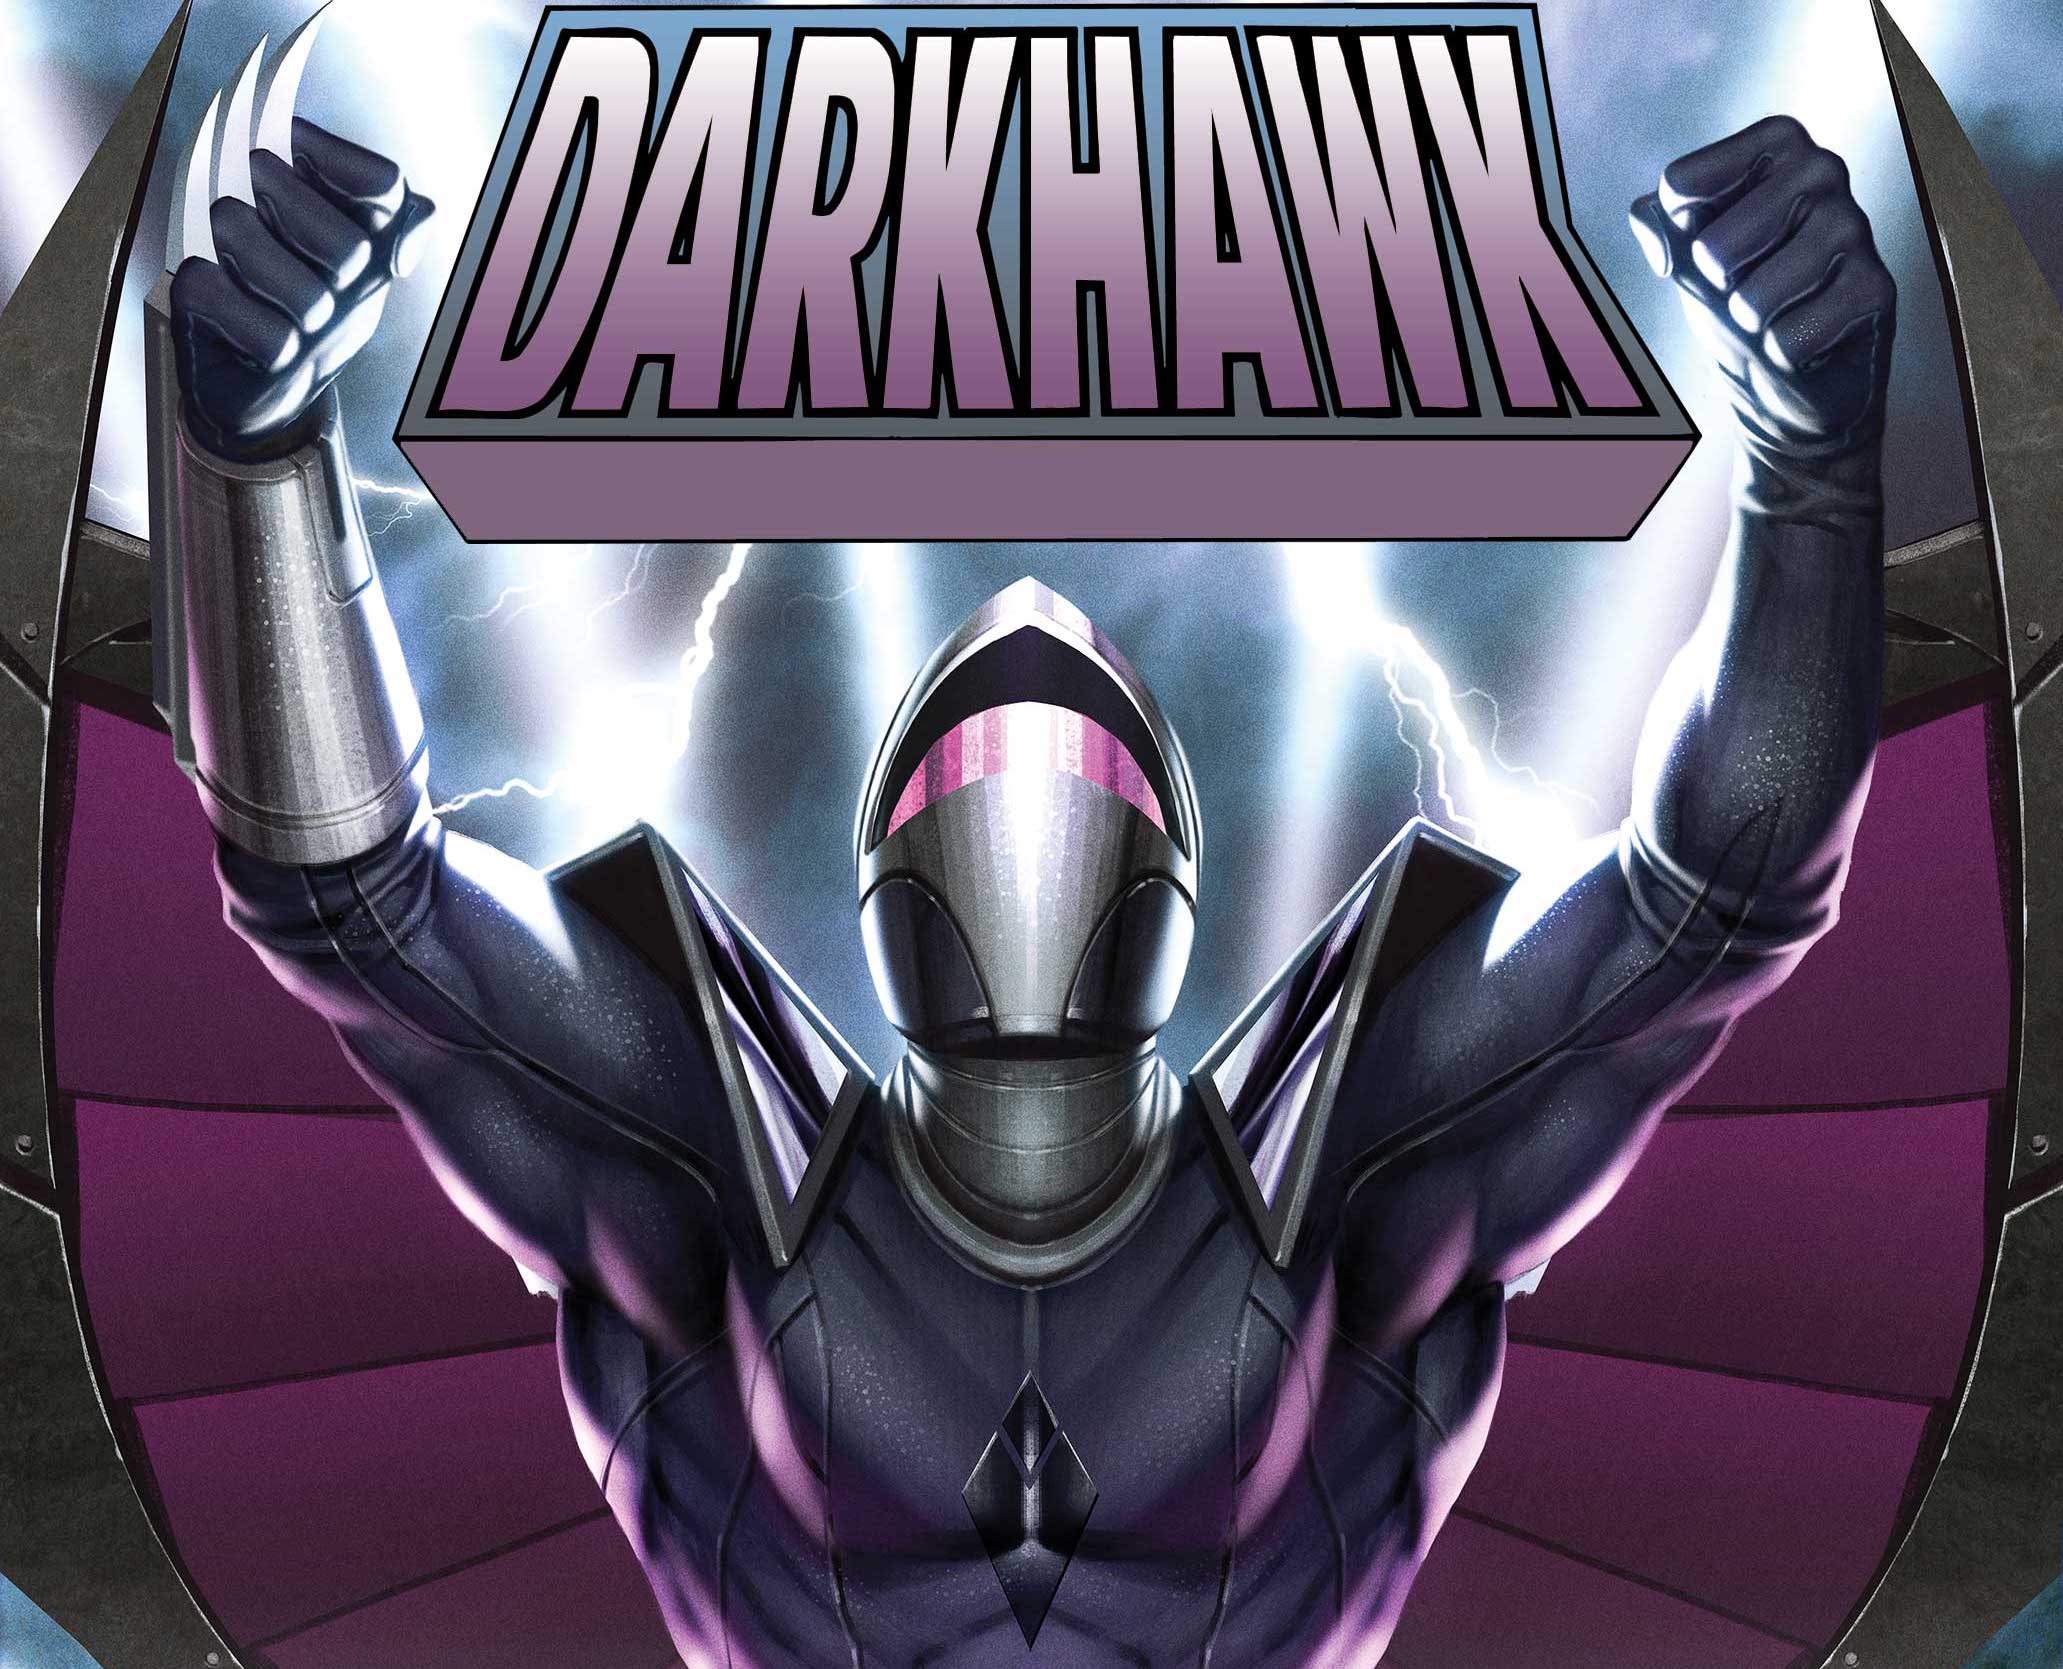 Marvel to celebrate Darkhawk's 30th anniversary with anthology one-shot